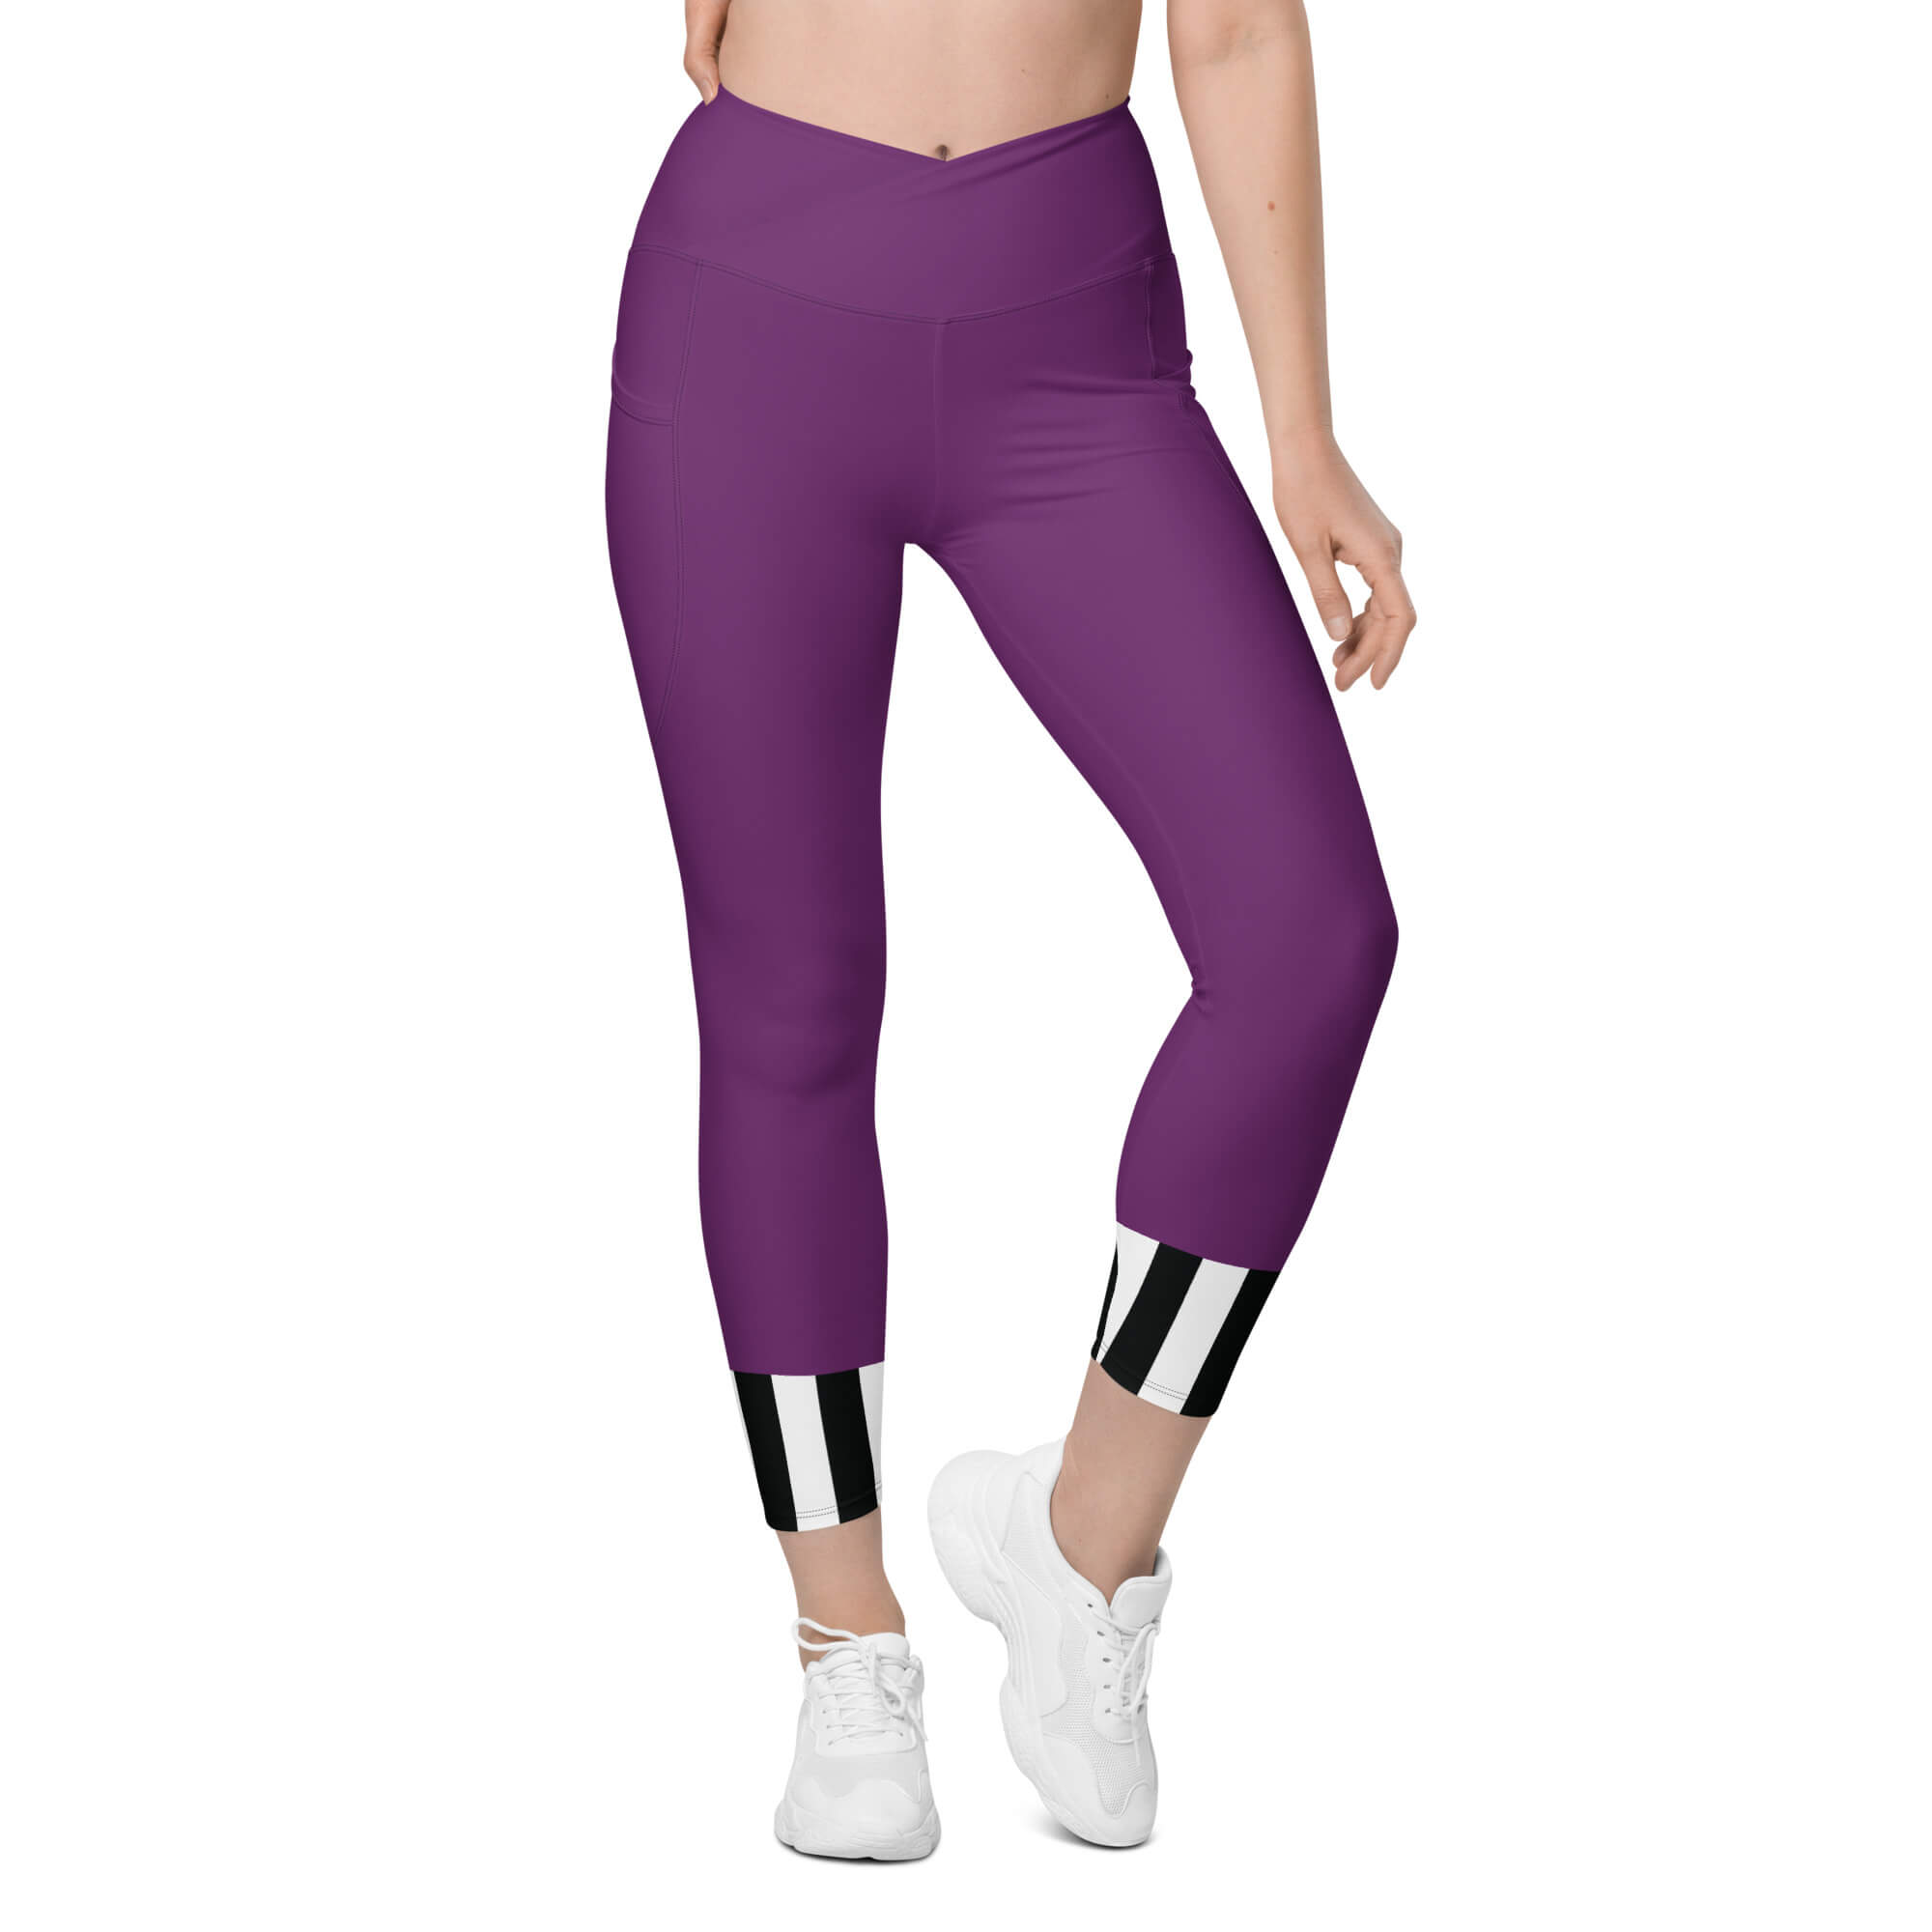 Turban low stripe crossover leggings with pockets - Shop 63